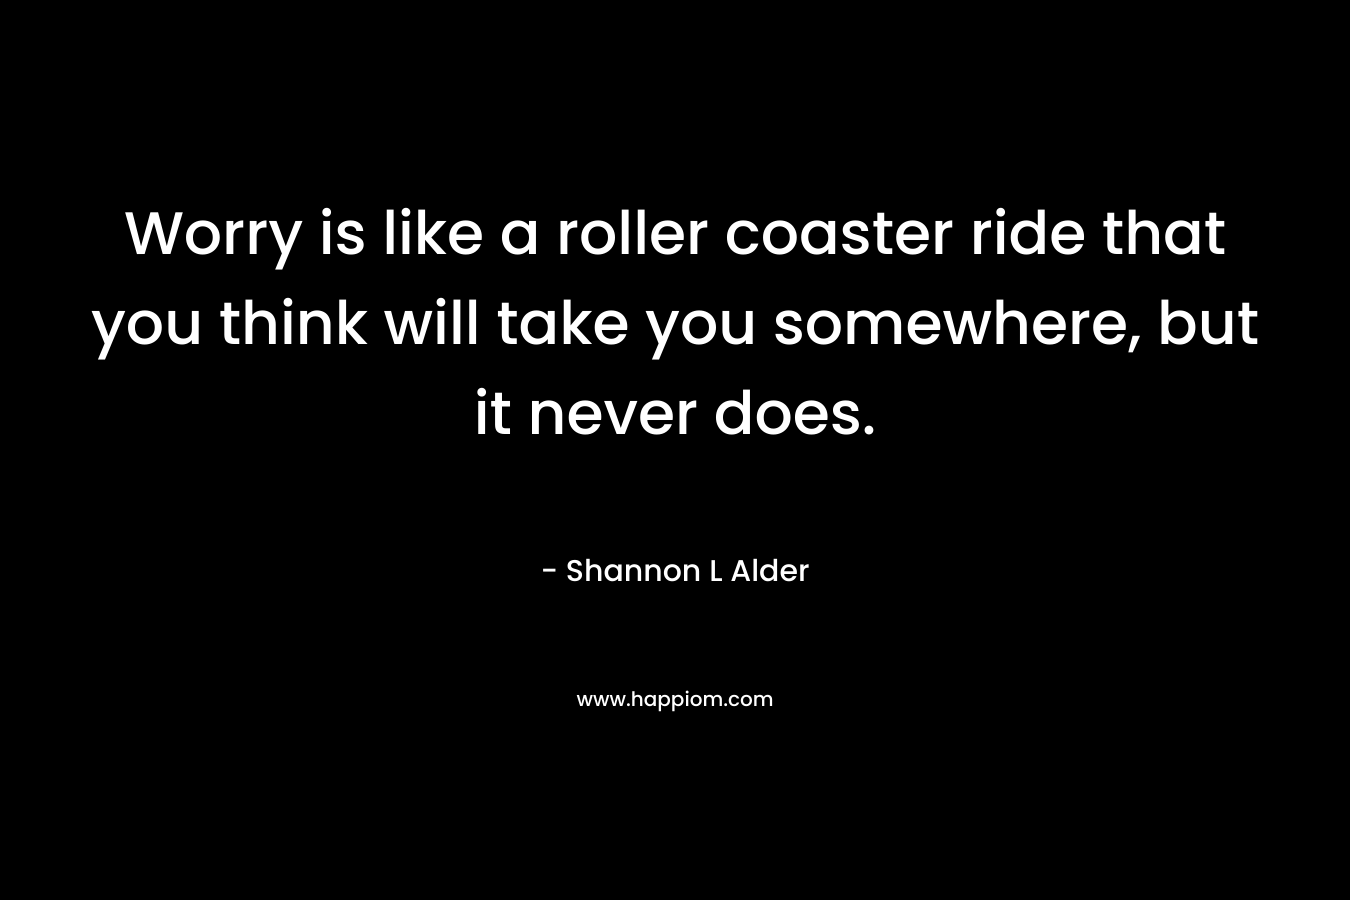 Worry is like a roller coaster ride that you think will take you somewhere, but it never does.